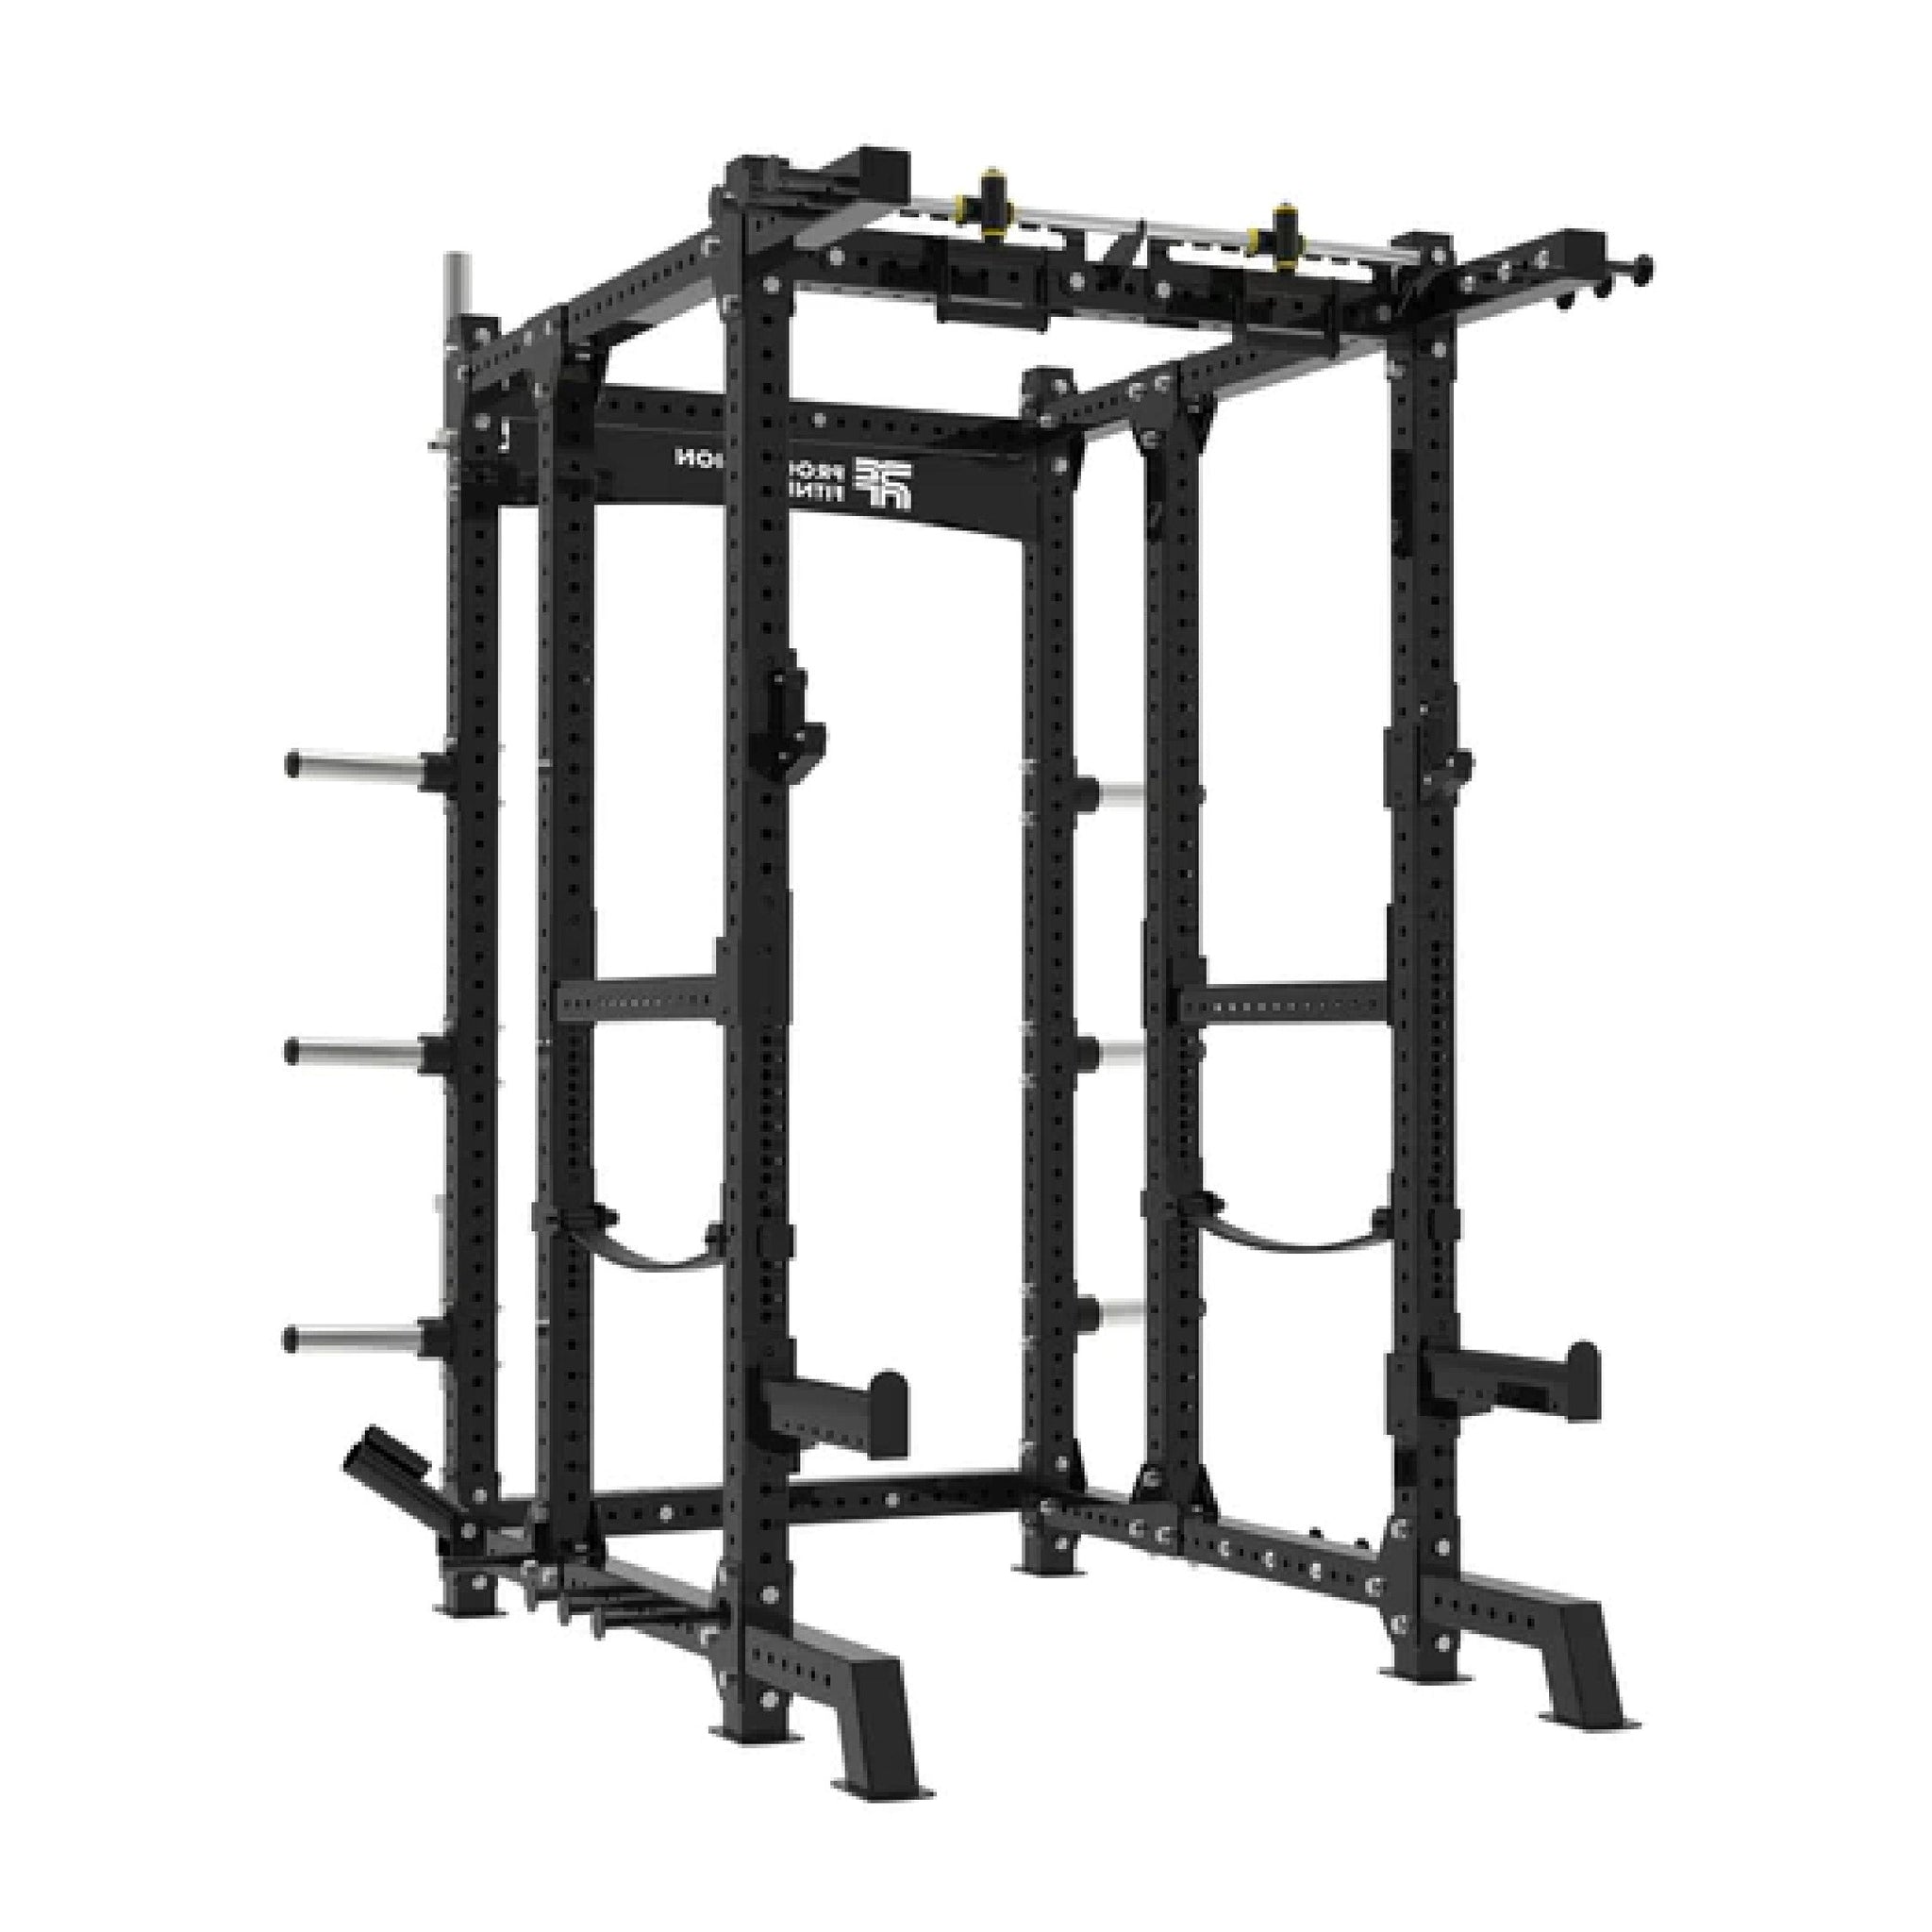 Progression 900 Full Cage - (Including Attachments)-Weight Lifting Cage-Progression Fitness-1